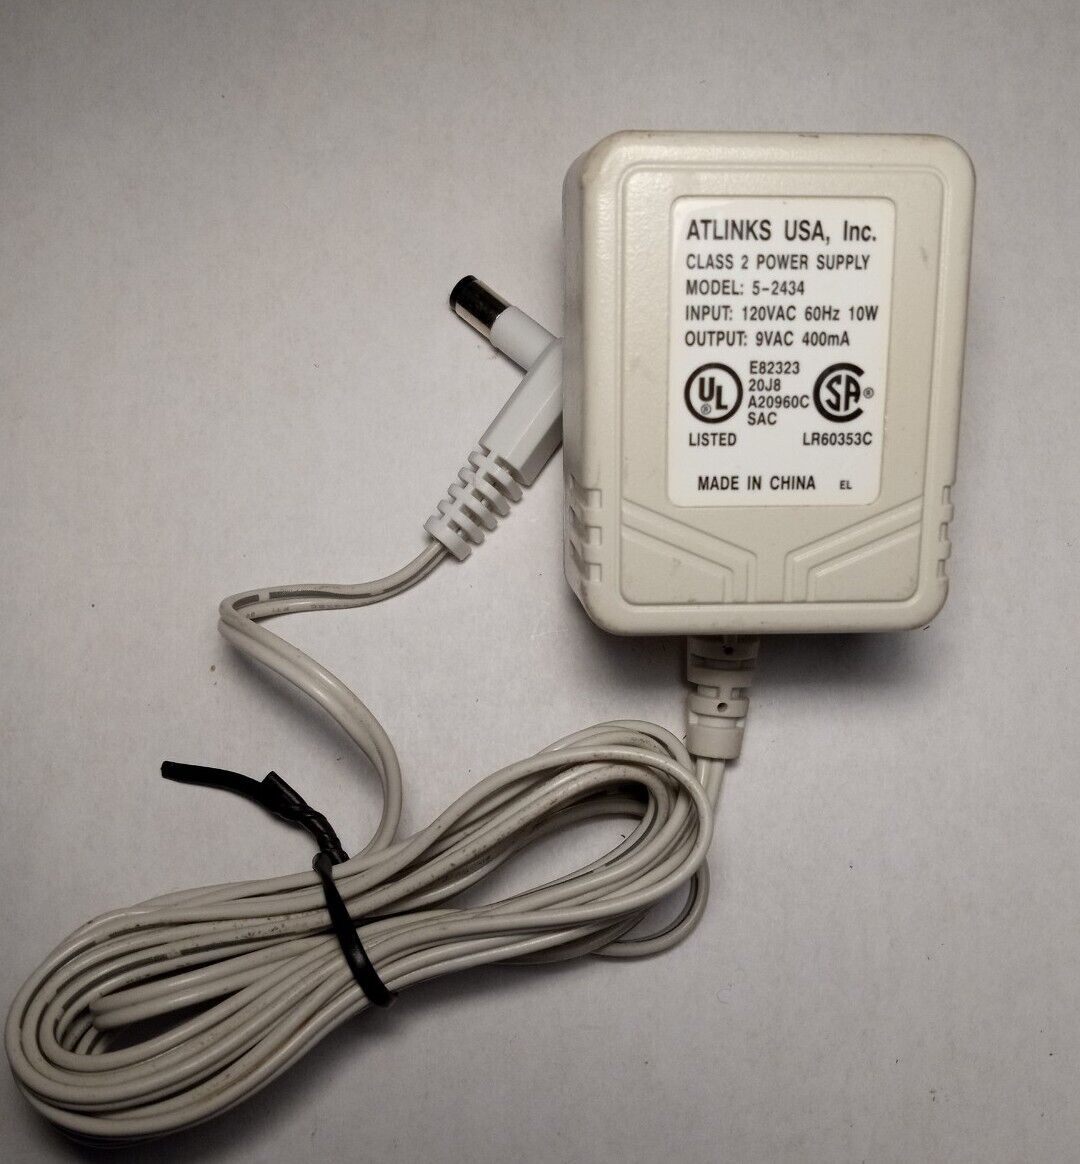 Atlinks USA 5-2434 Class 2 Power Supply 9VAC 400mA AC Adapter Charger Tested Brand: ATLINKS Type: Transformer Color: